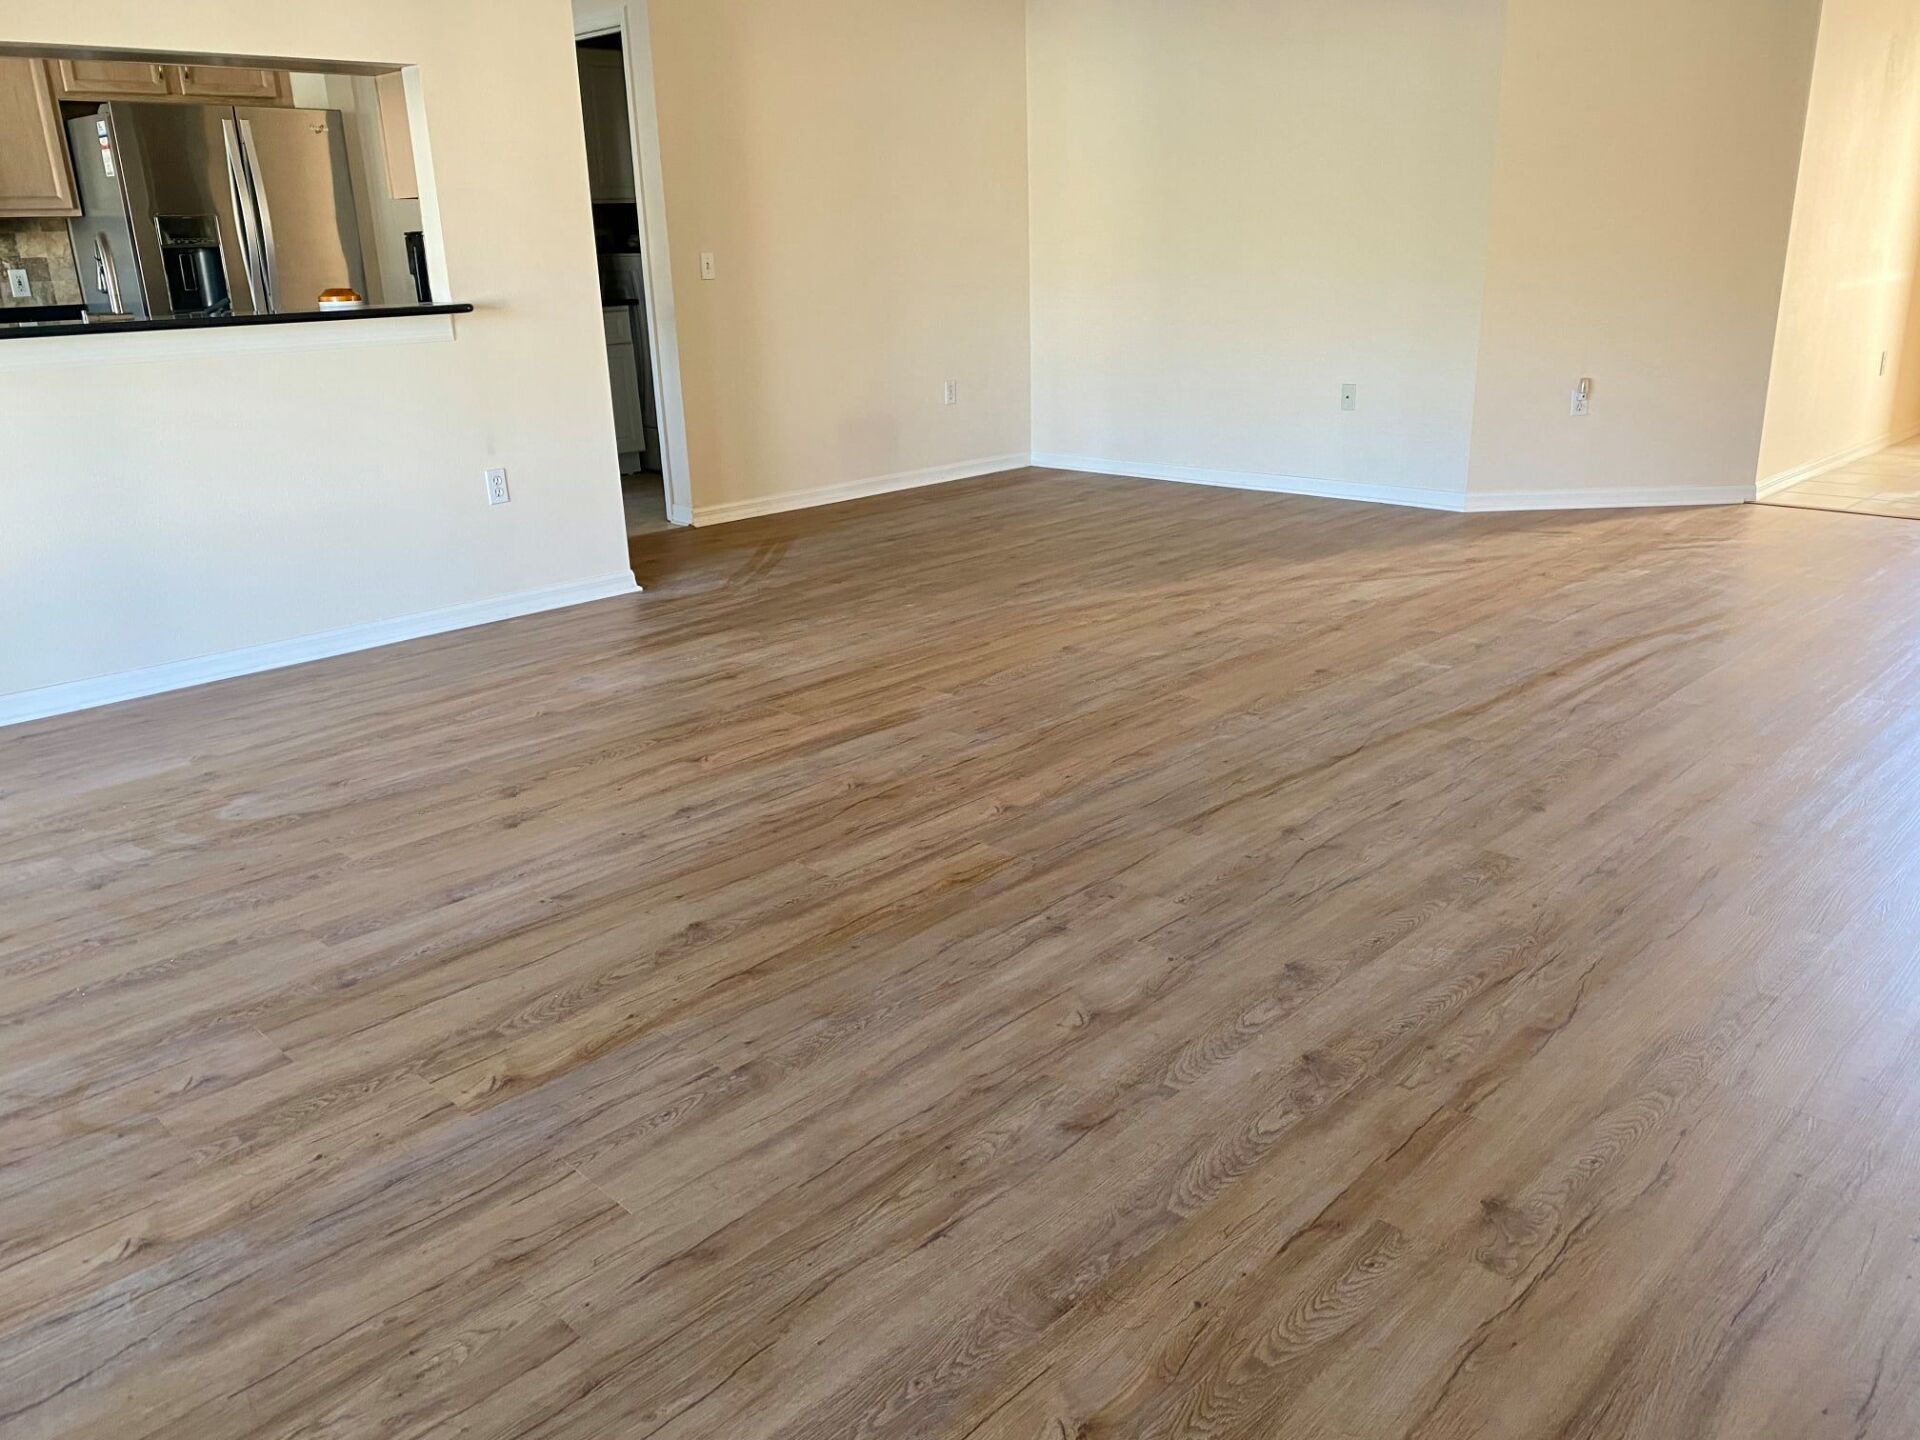 Laminate floor | Spring Hill, FL | J. Alex Painting and Property Maintenance